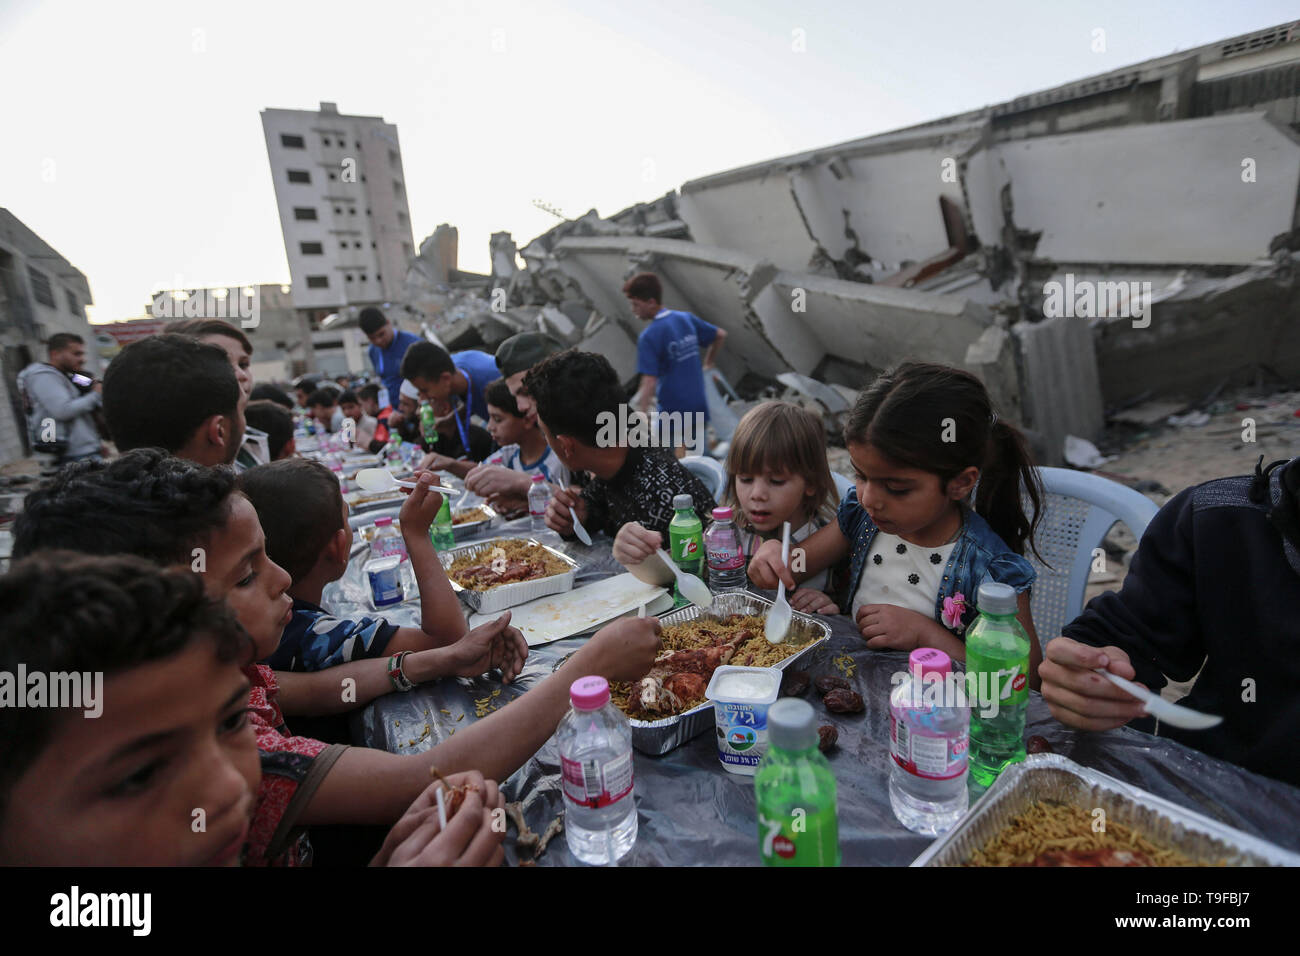 Gaza, Palestinian Territories. 19th May, 2019. Palestinian families break their fast during the Muslim holy fasting month of Ramadan, next to the remains of a building that was destroyed during Israeli air strikes. Credit: Mohammed Talatene/dpa/Alamy Live News Stock Photo